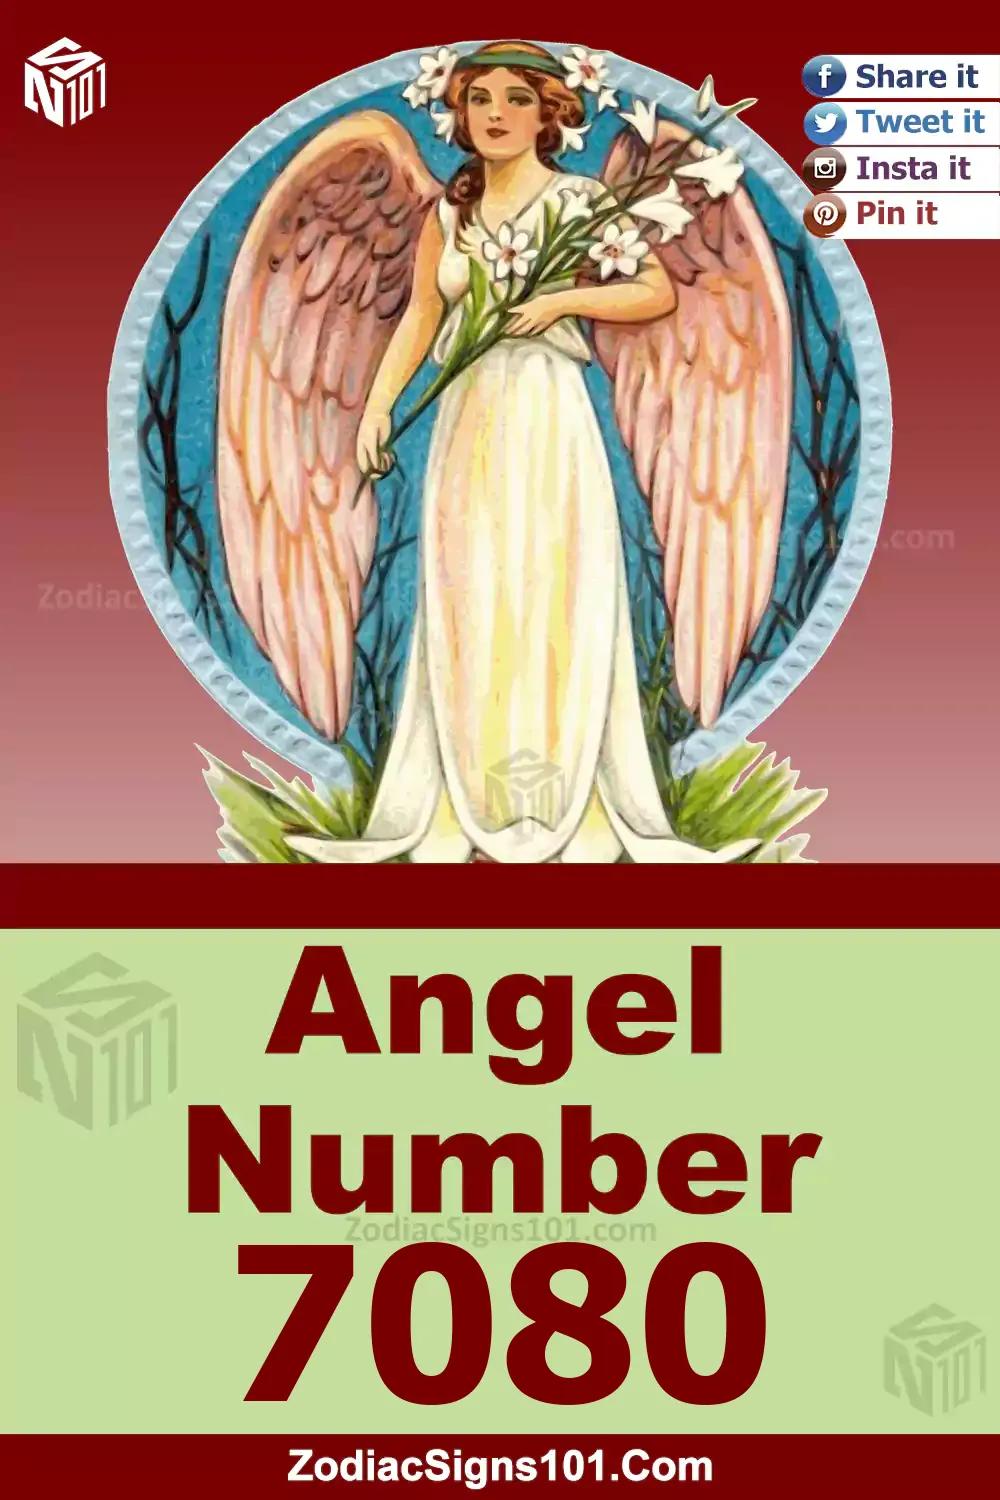 7080 Angel Number Meaning